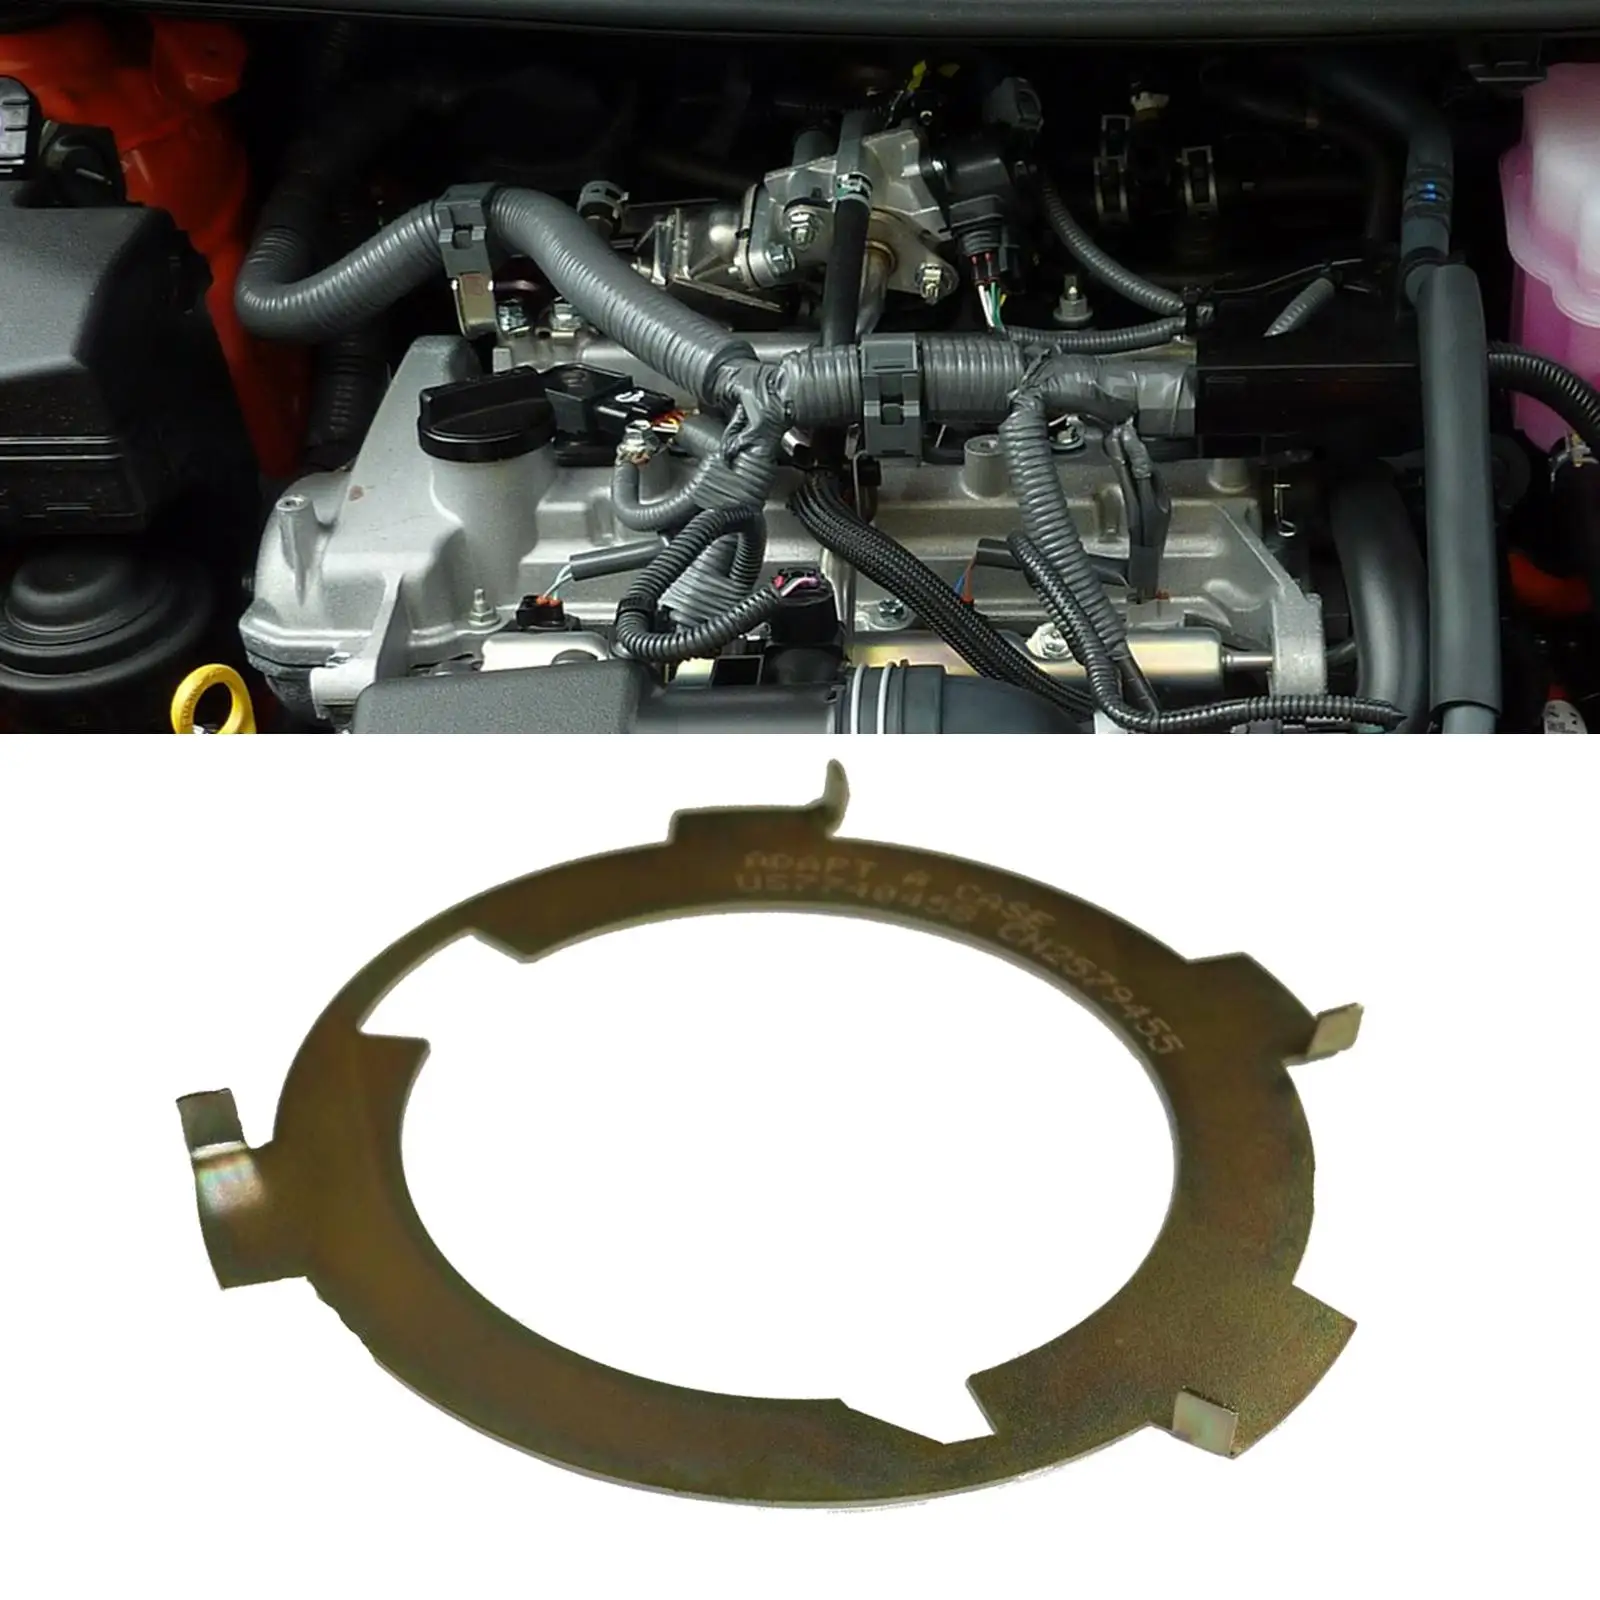 Car Transfer Case Oil , BRNY4080, 482460, Oil  Plate Gasket Fit for GM NP136 NP236 NP246 NP261HD NP263HD 1998-2007 Metal